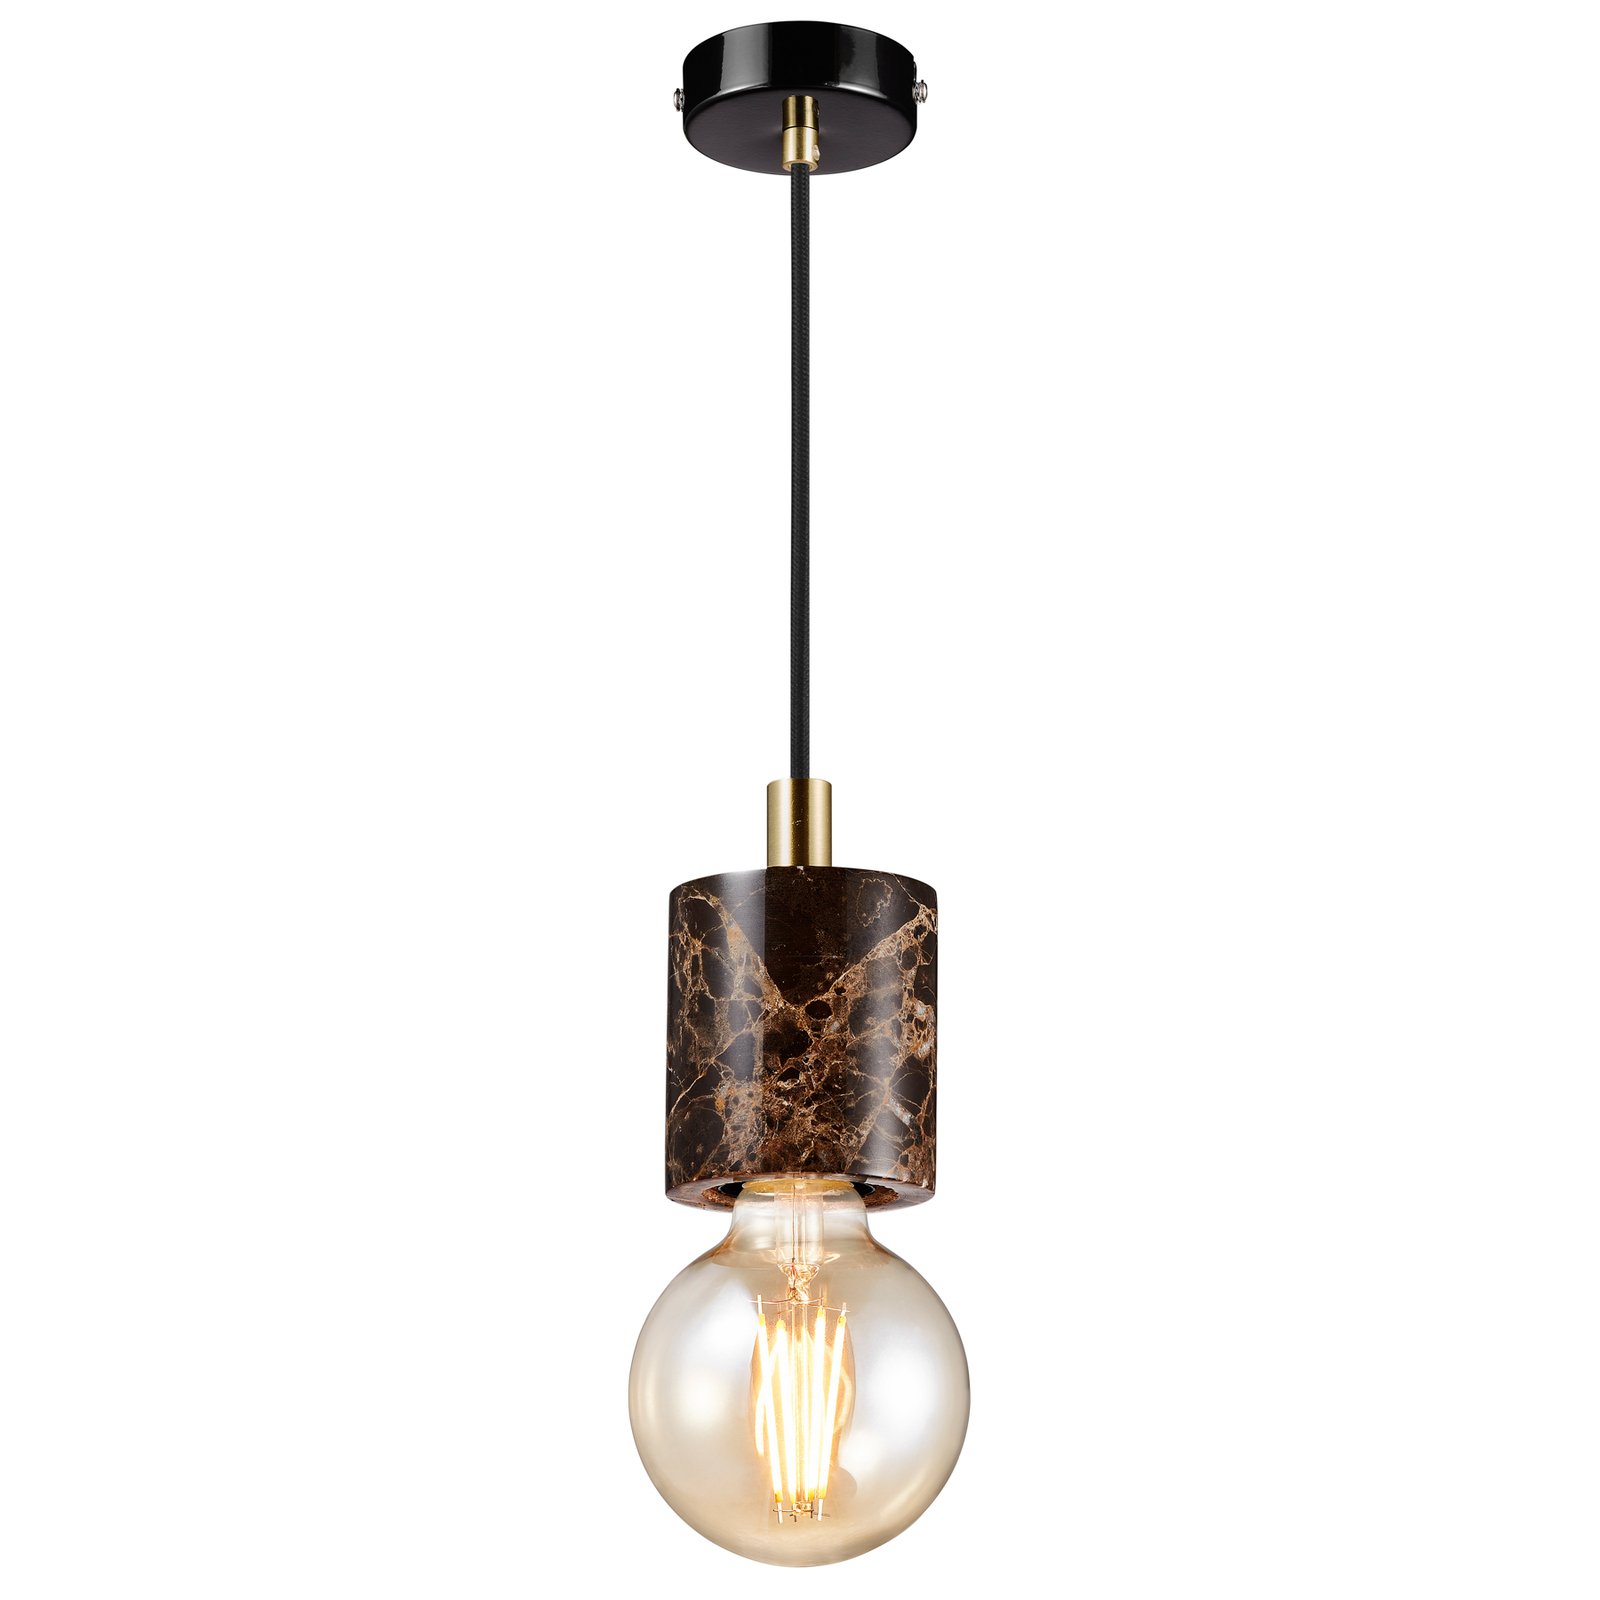 Siv pendant light, marble cylinder, brown